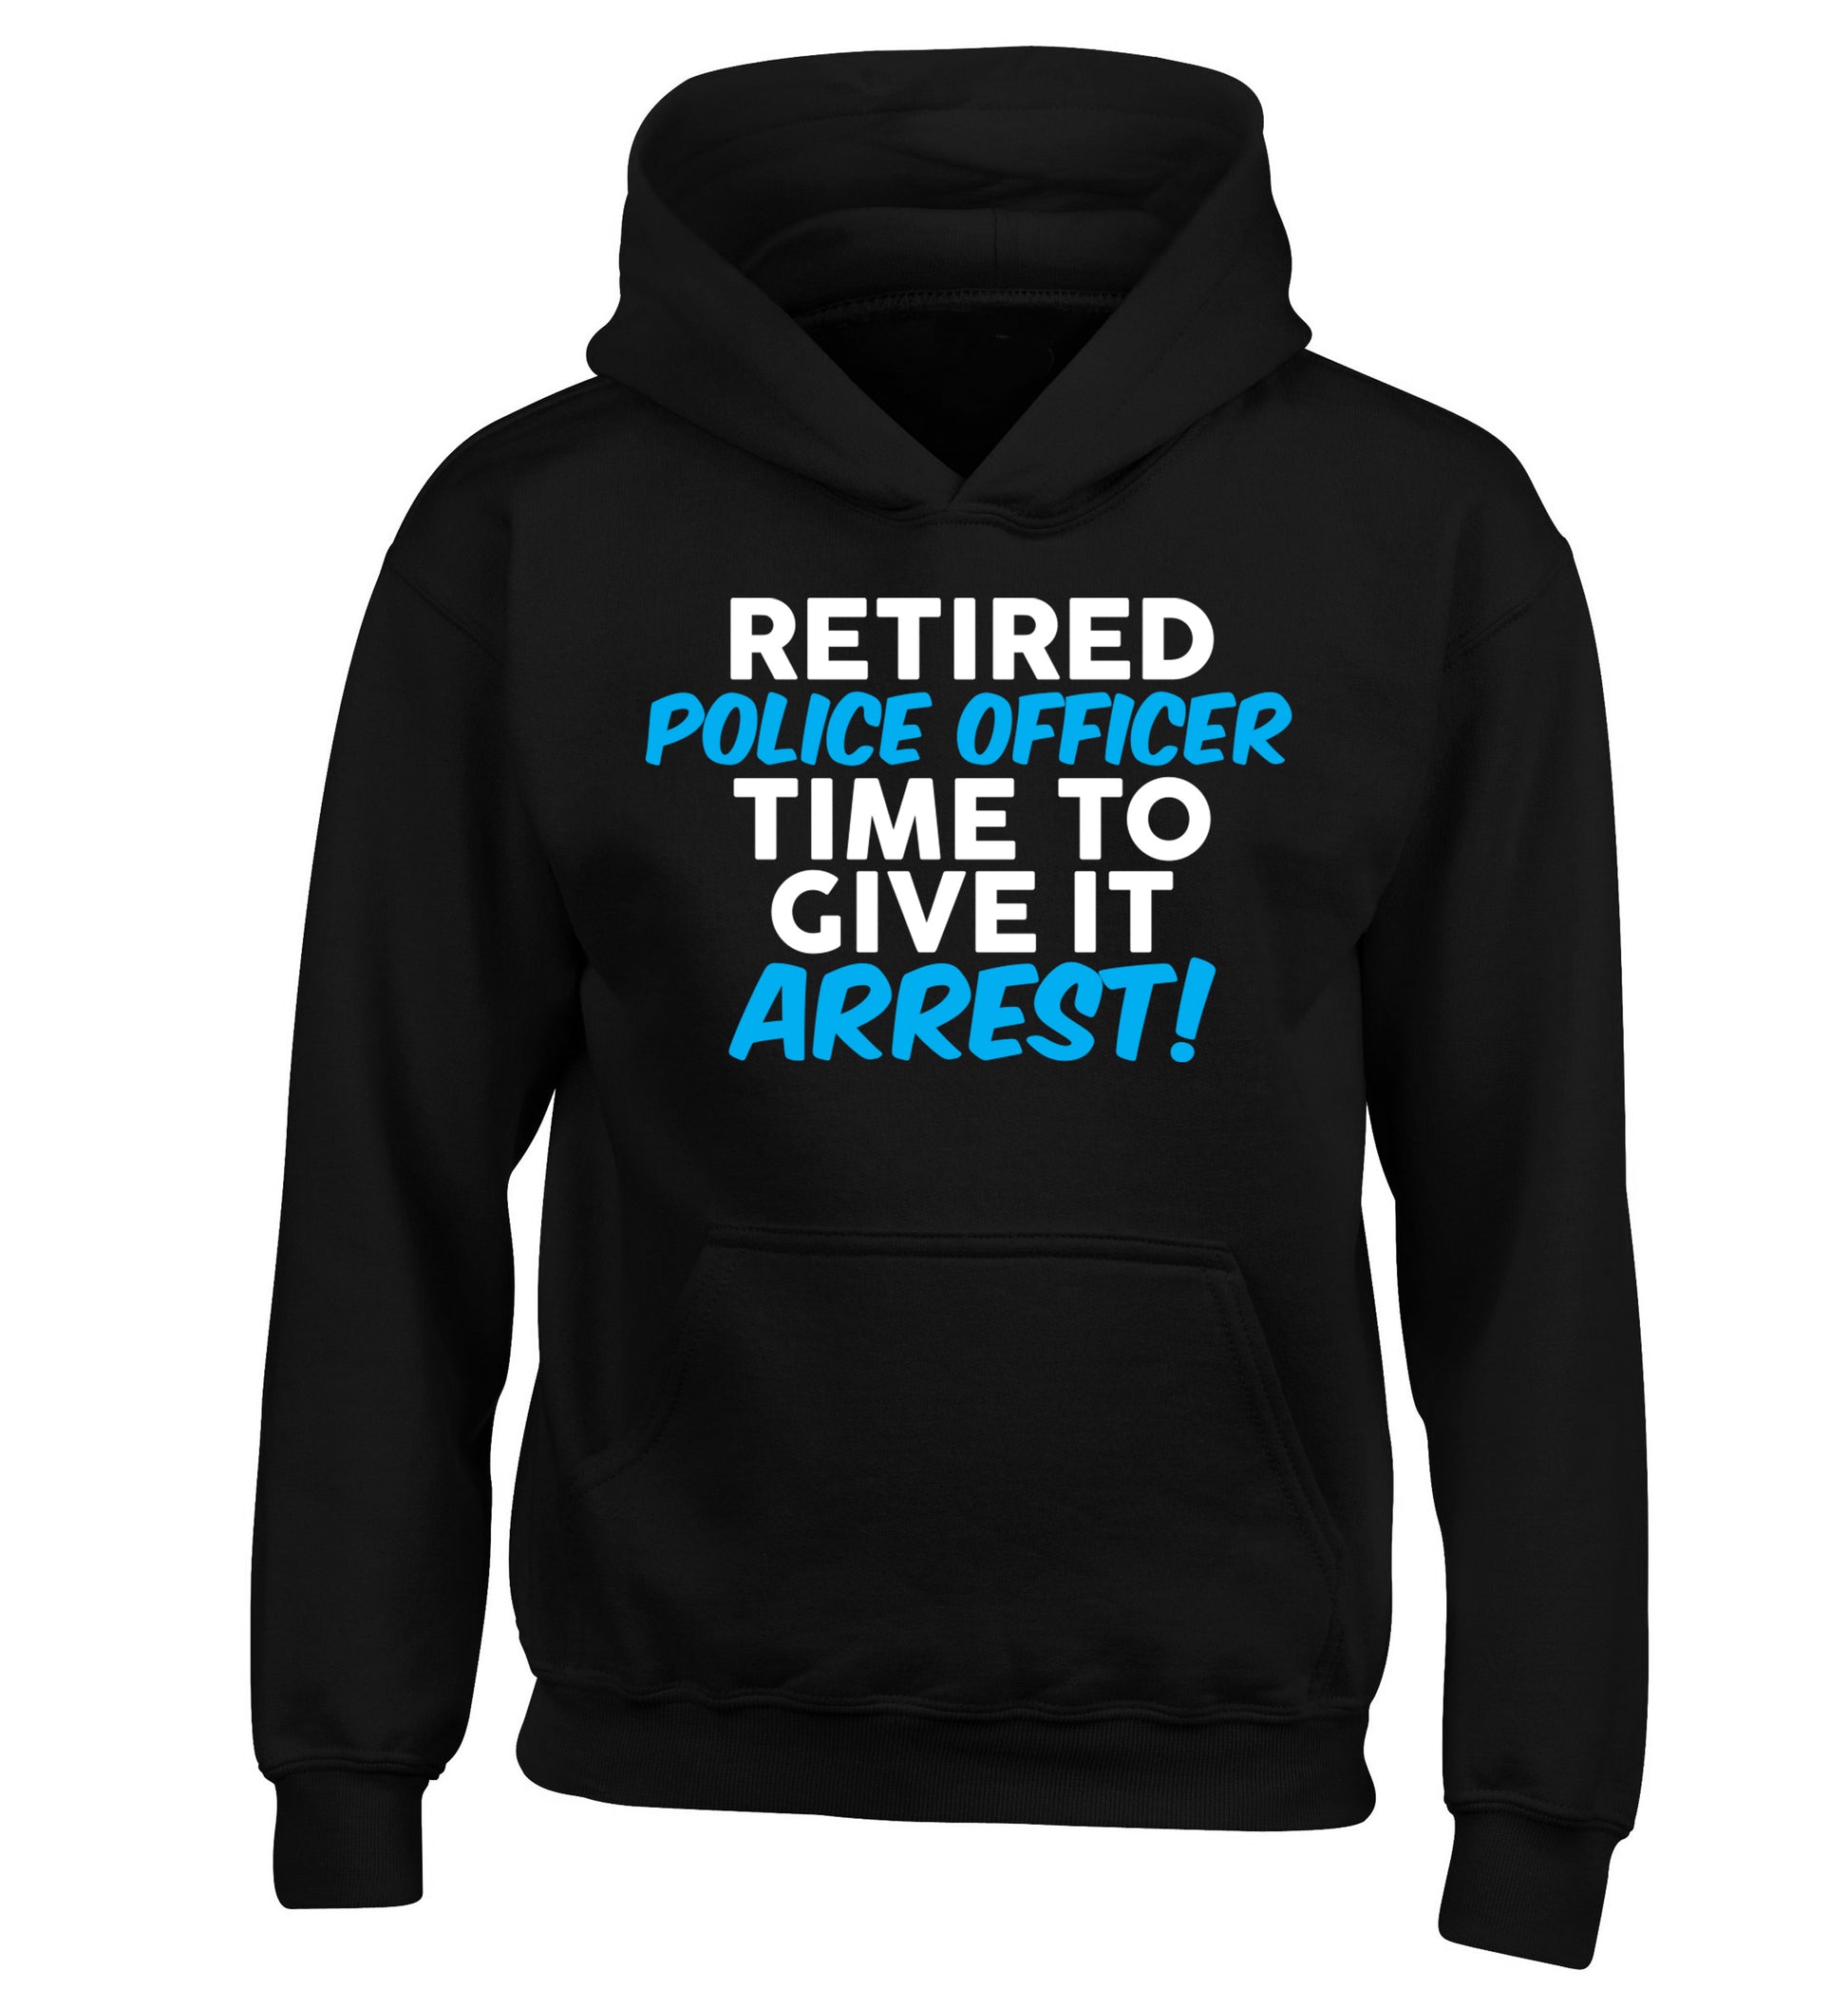 Retired police officer time to give it arrest children's black hoodie 12-13 Years